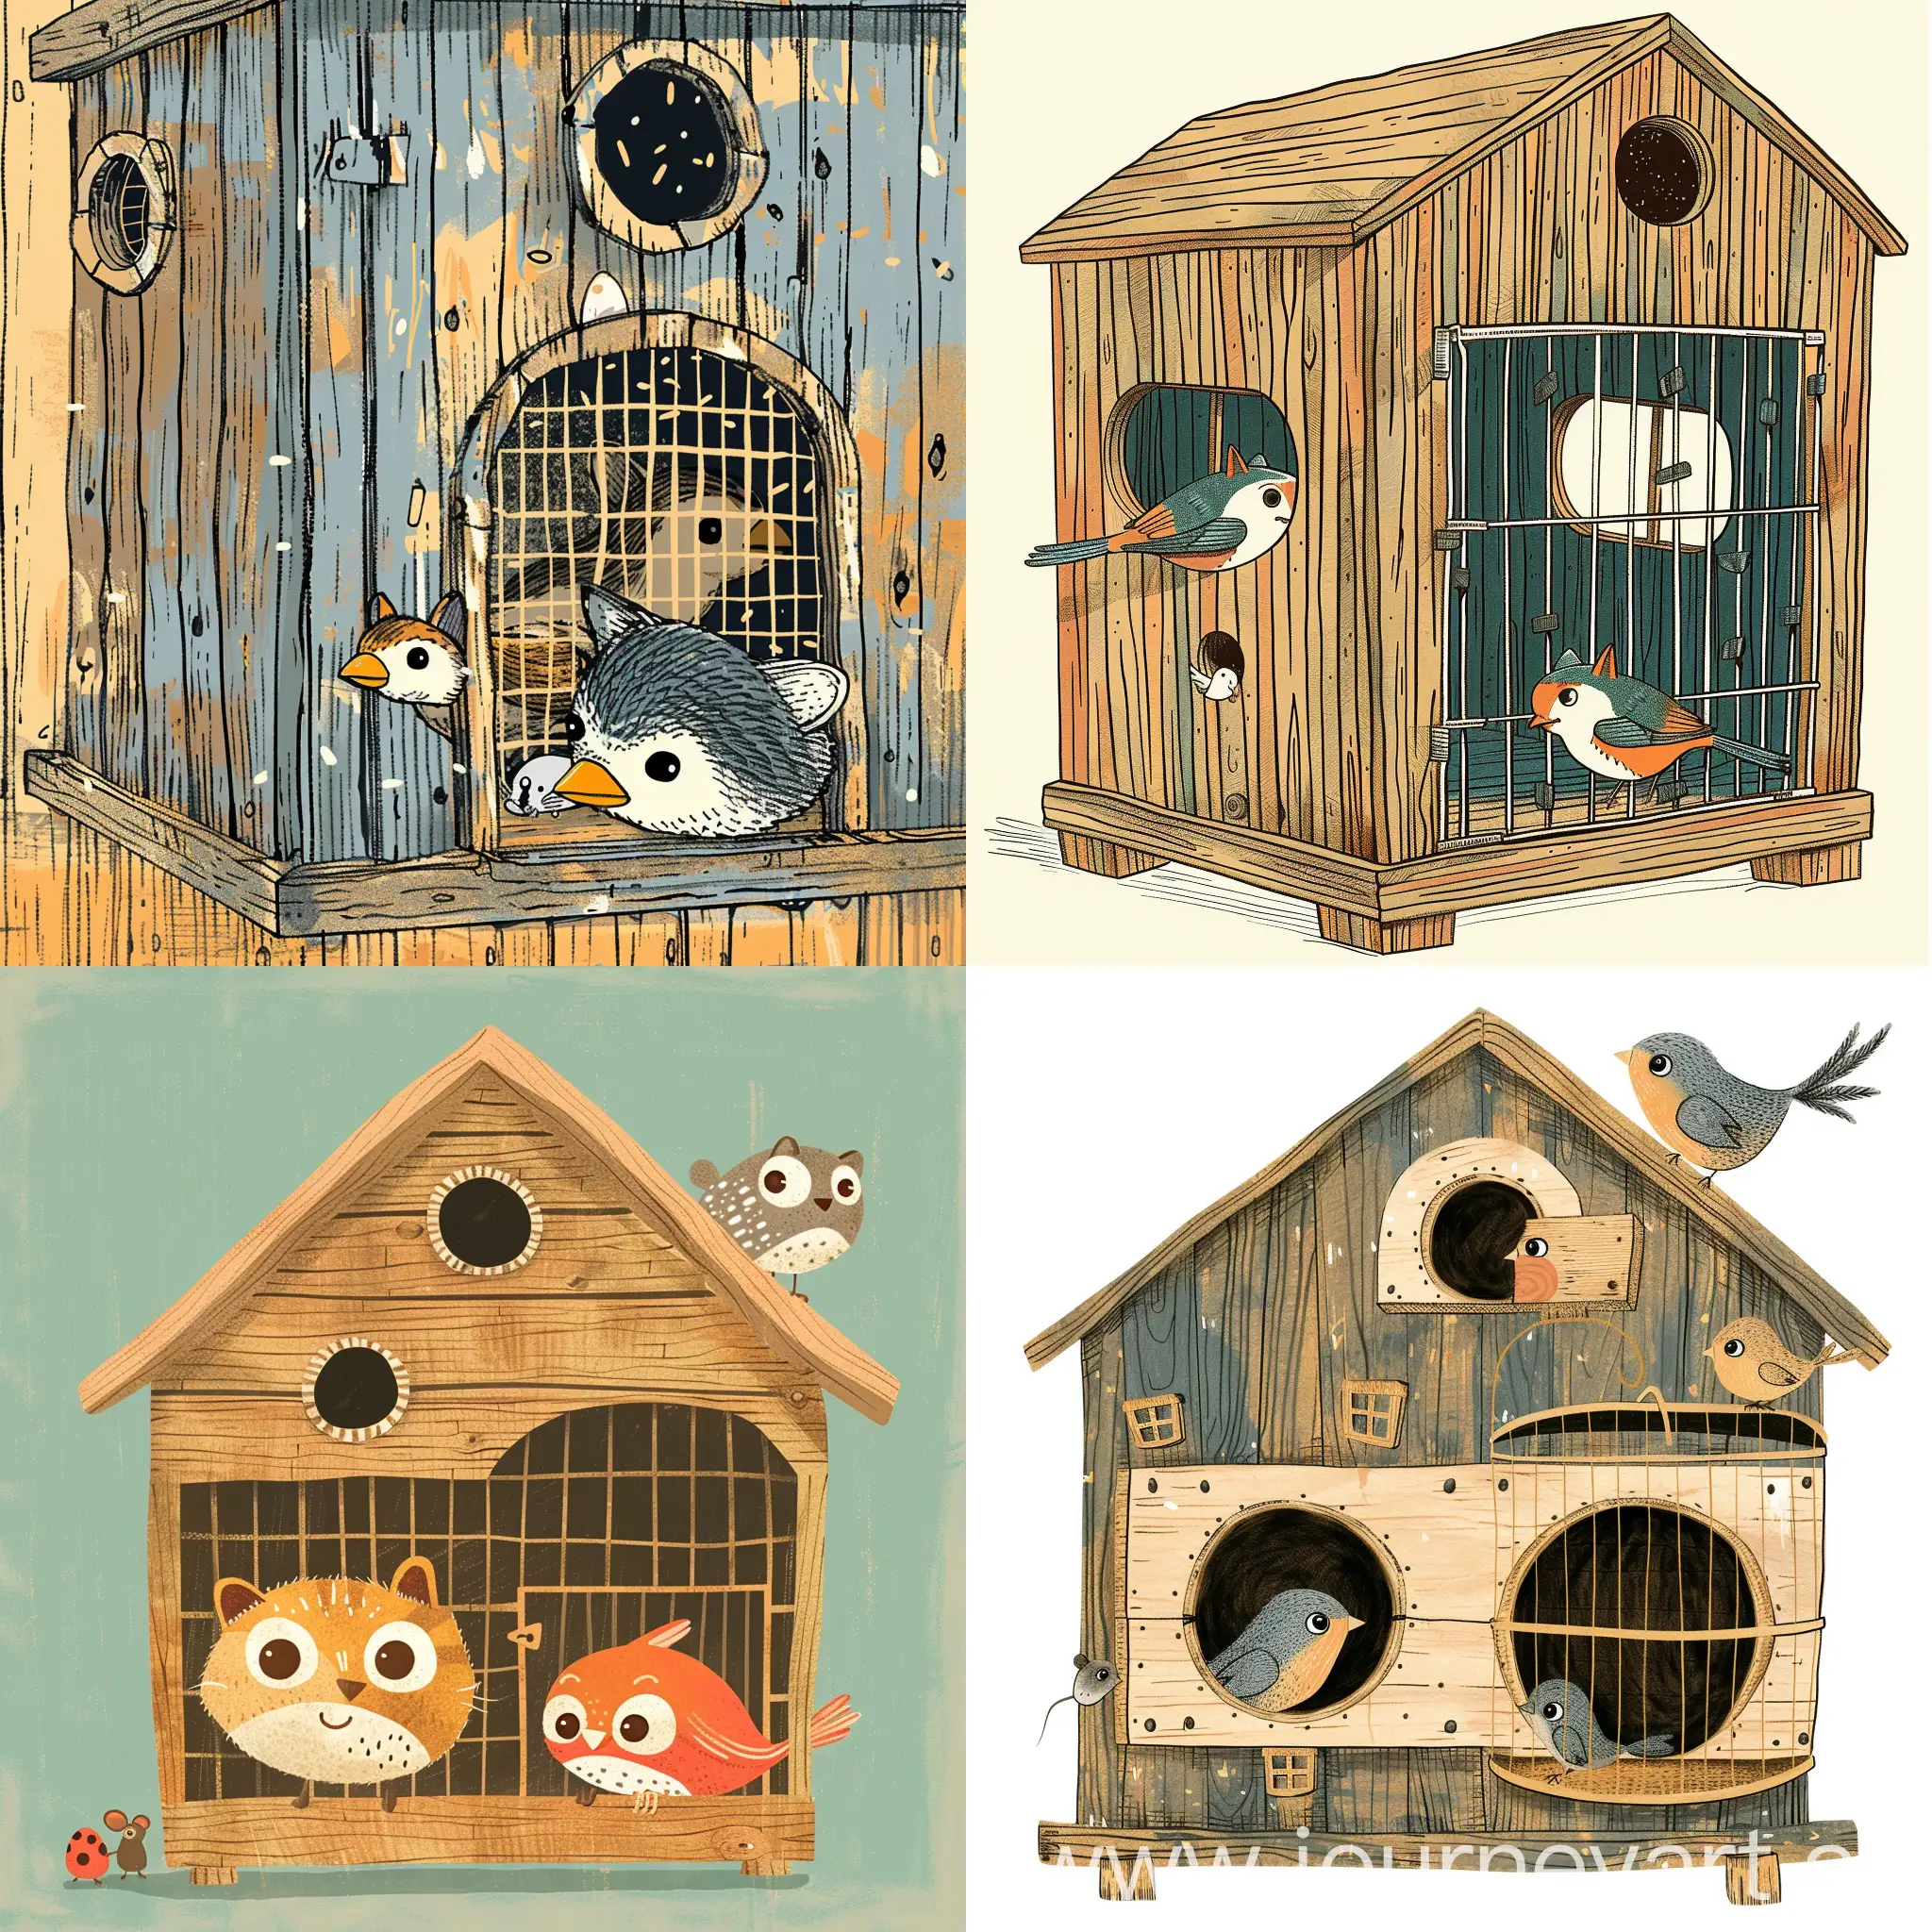 Bird cage in the shape of a house made of wood with windows and holes、Two birds are peeking out of the hole, small mouse (zoom-up). Big cat, simple image pattern、Hand drawn, Easter colors, abstract, cheerful, whimsical, funny, children's storybook style, webtoon style